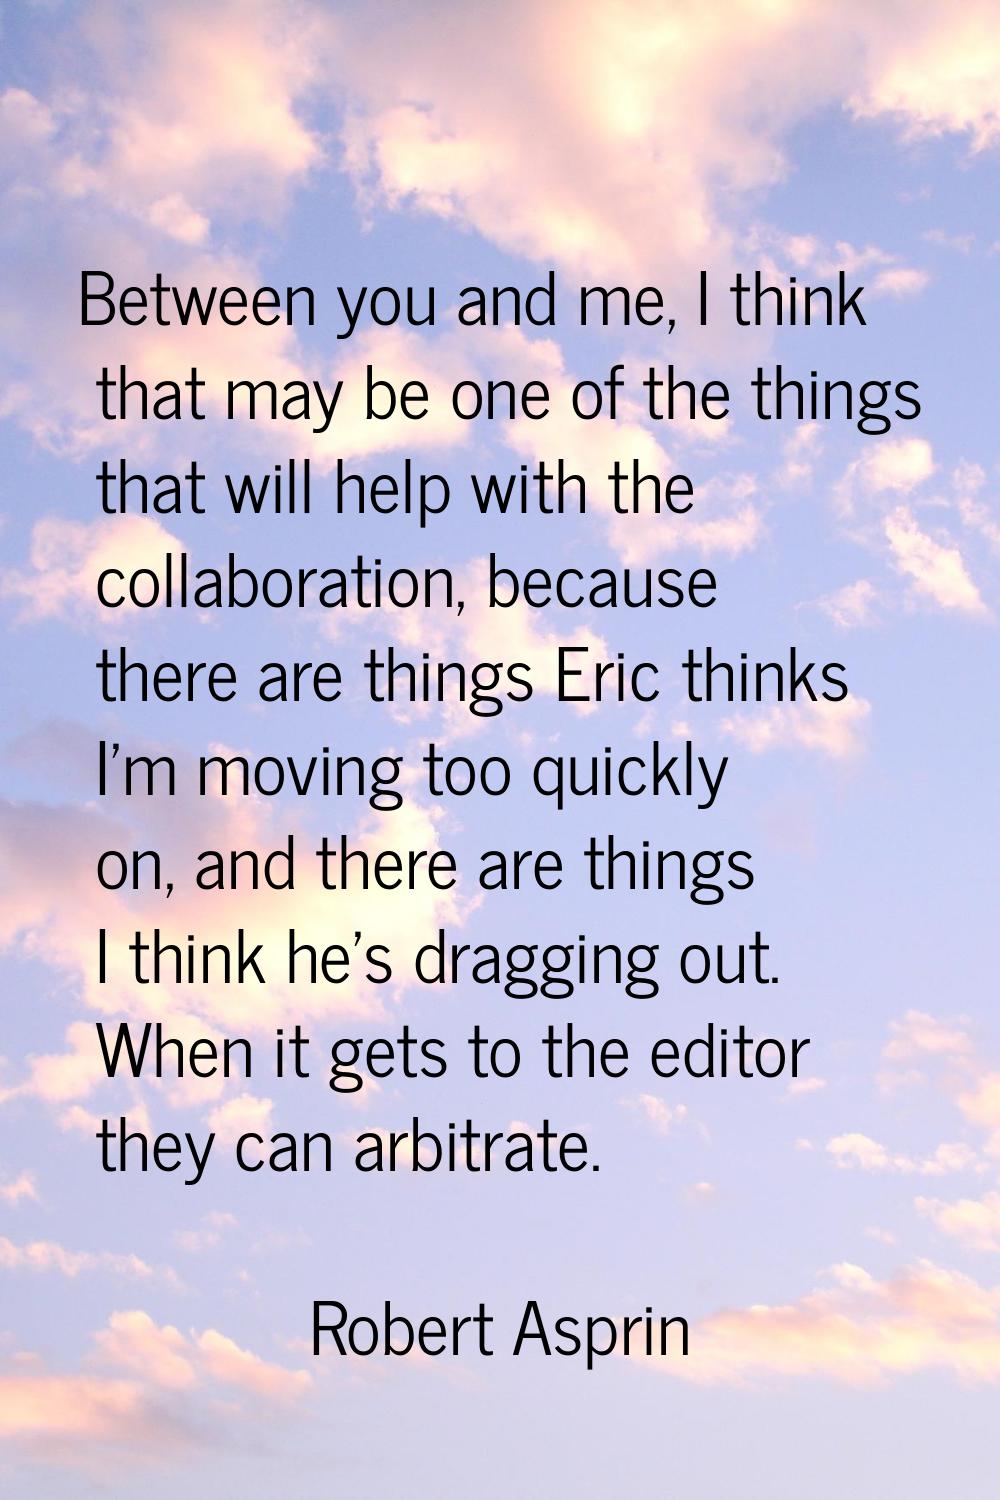 Between you and me, I think that may be one of the things that will help with the collaboration, be